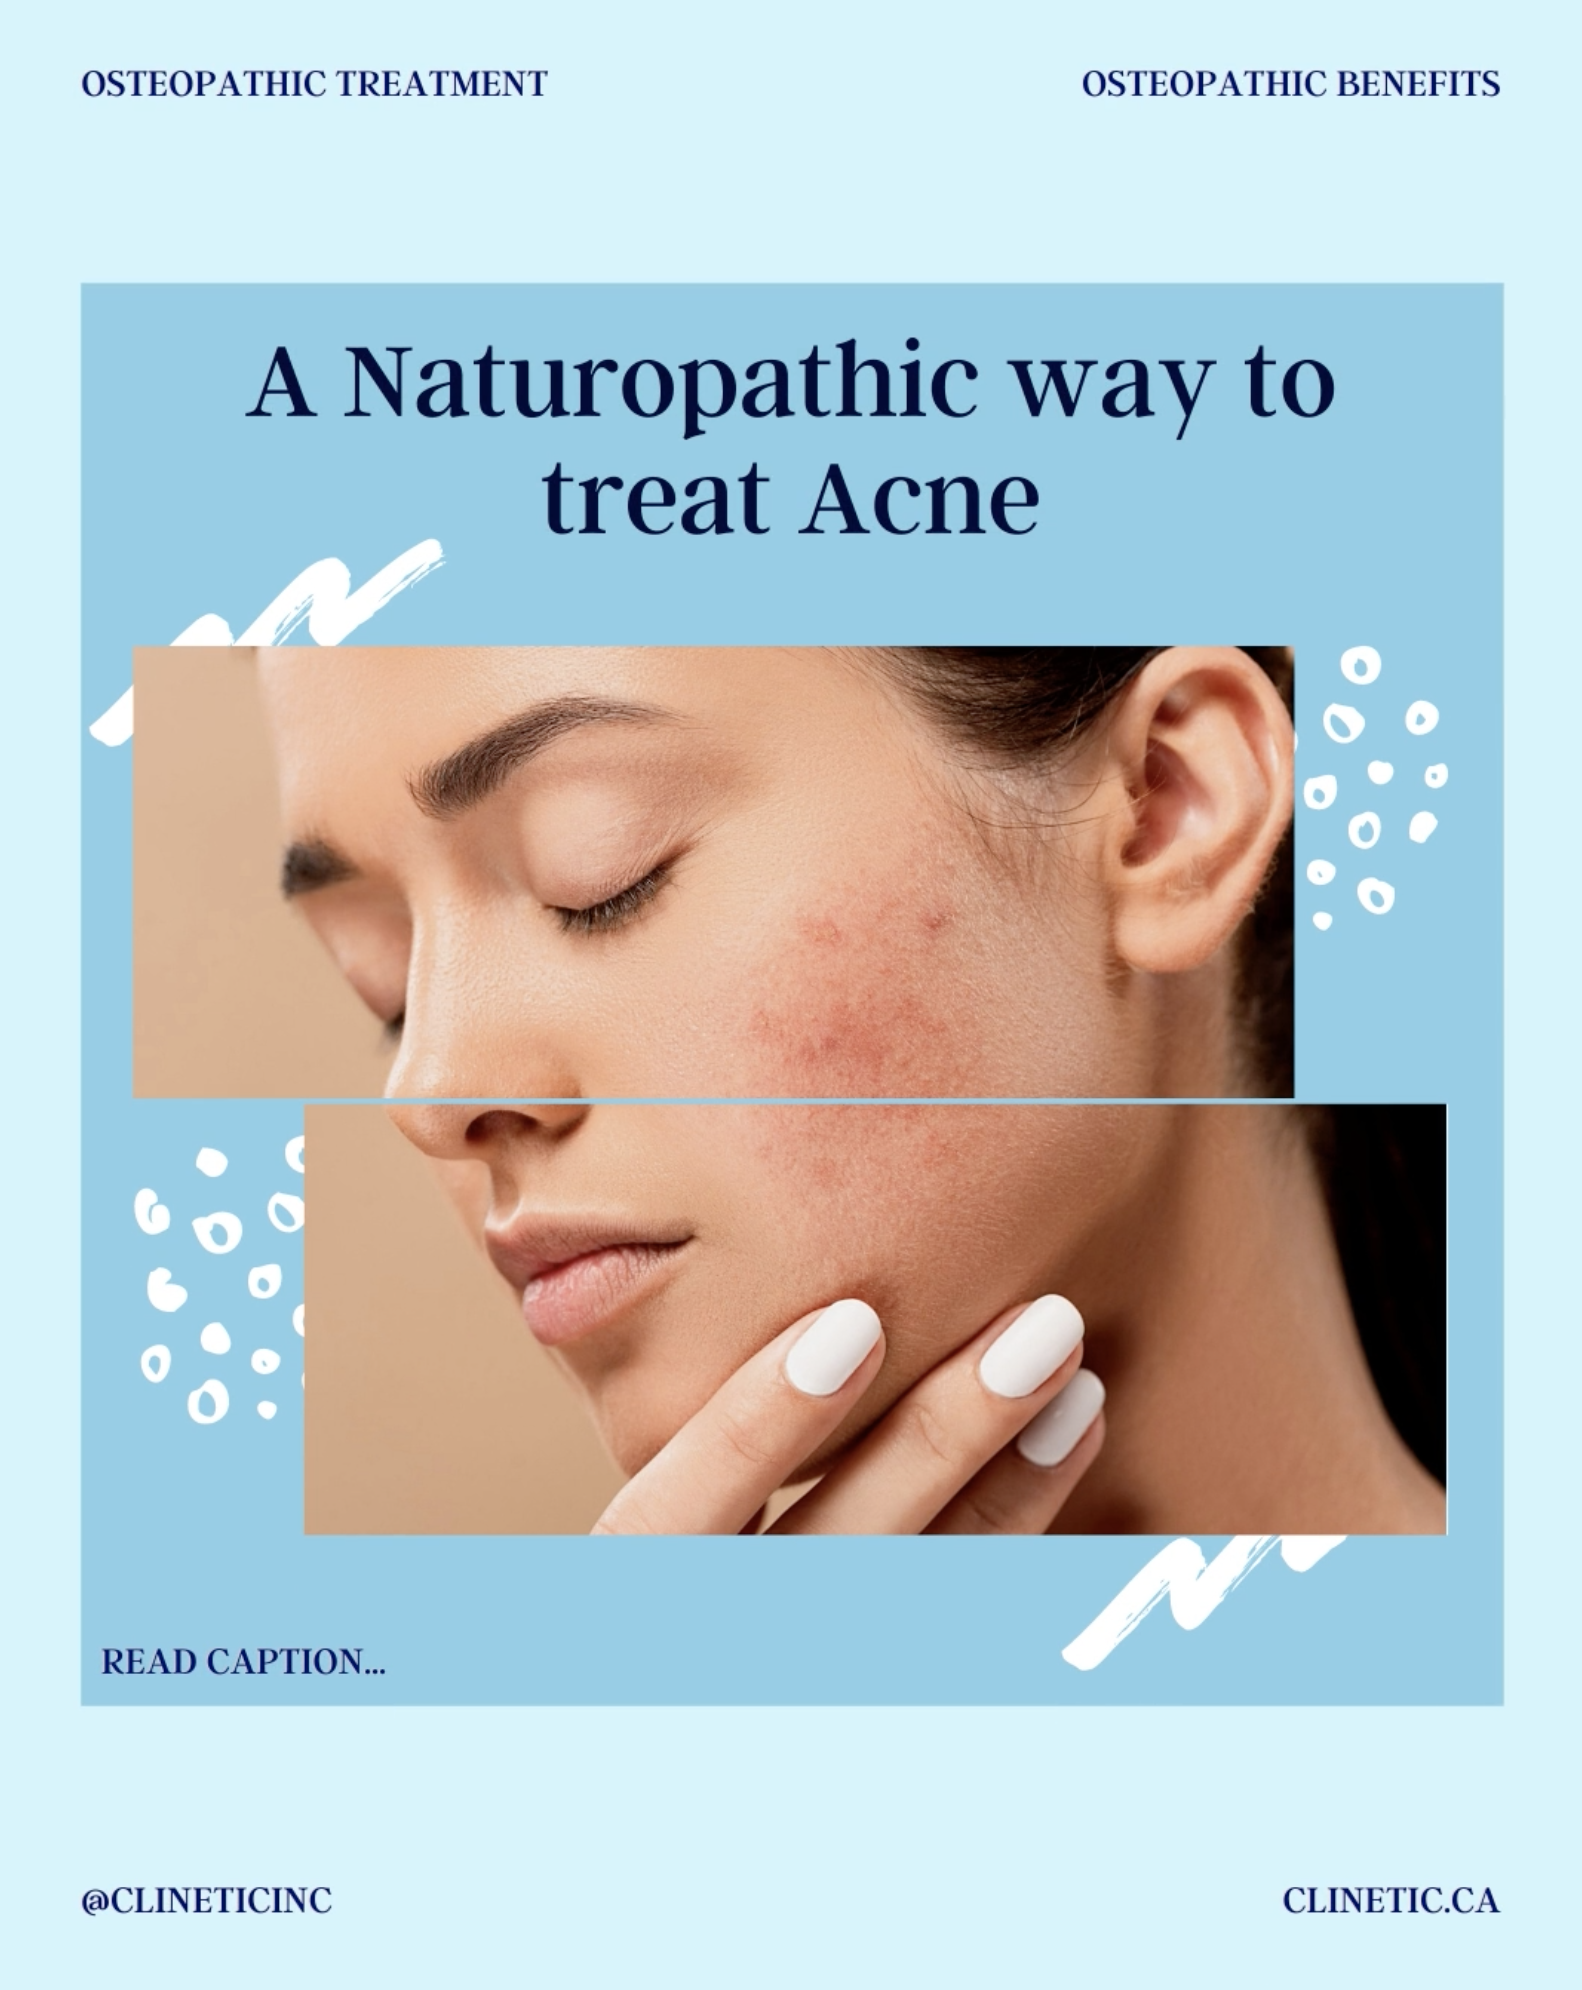 A Naturopathic way to treat Acne